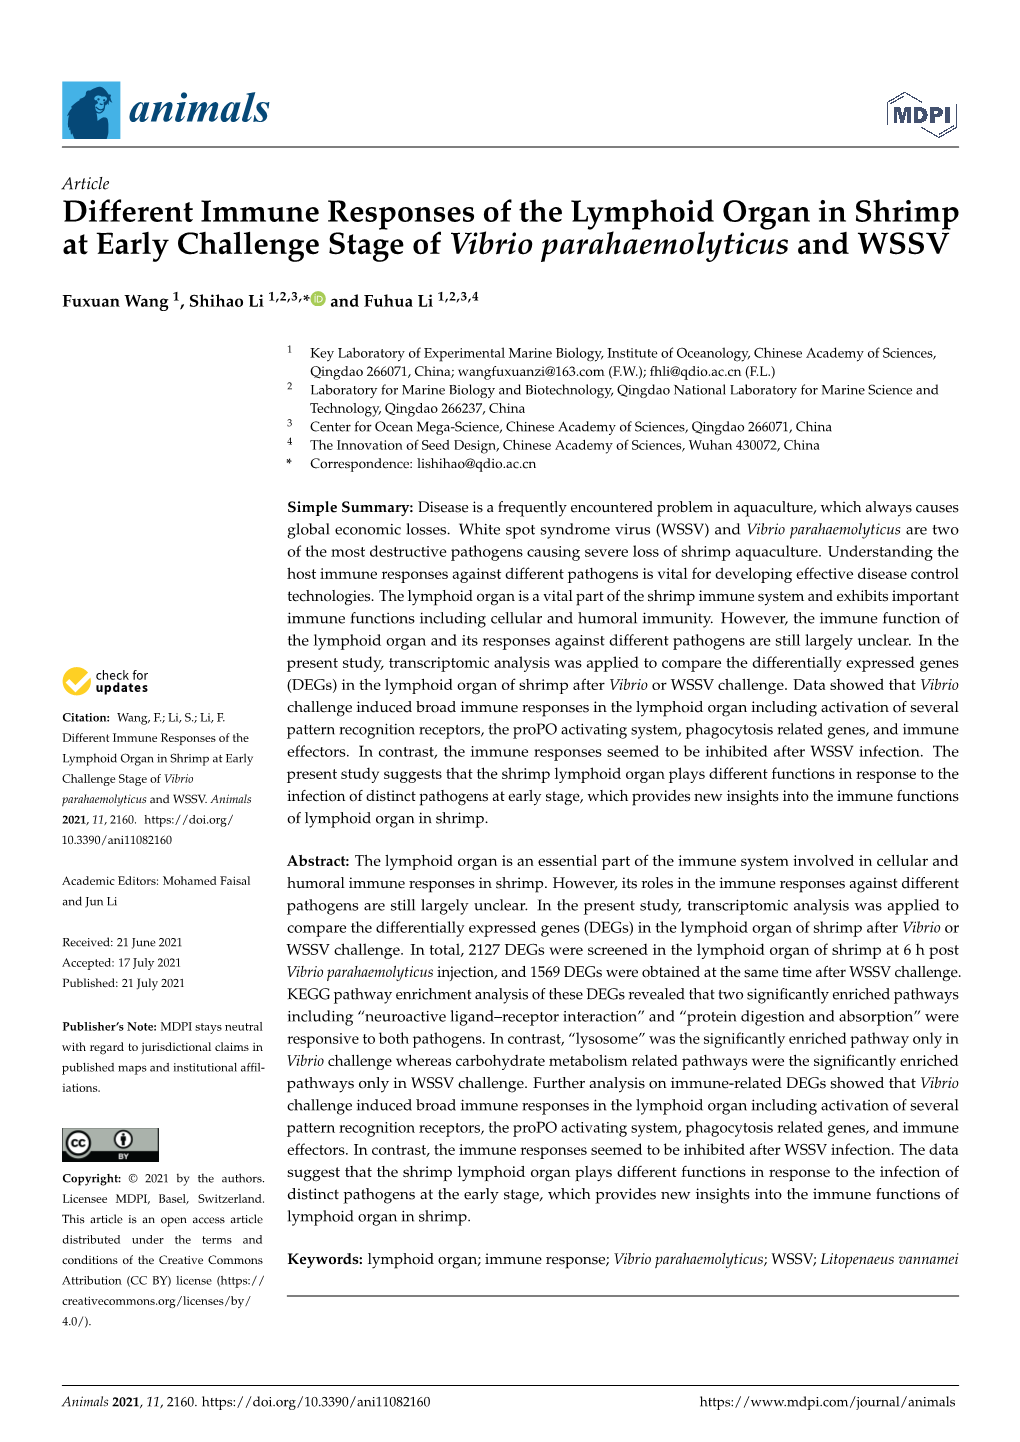 Different Immune Responses of the Lymphoid Organ in Shrimp at Early Challenge Stage of Vibrio Parahaemolyticus and WSSV